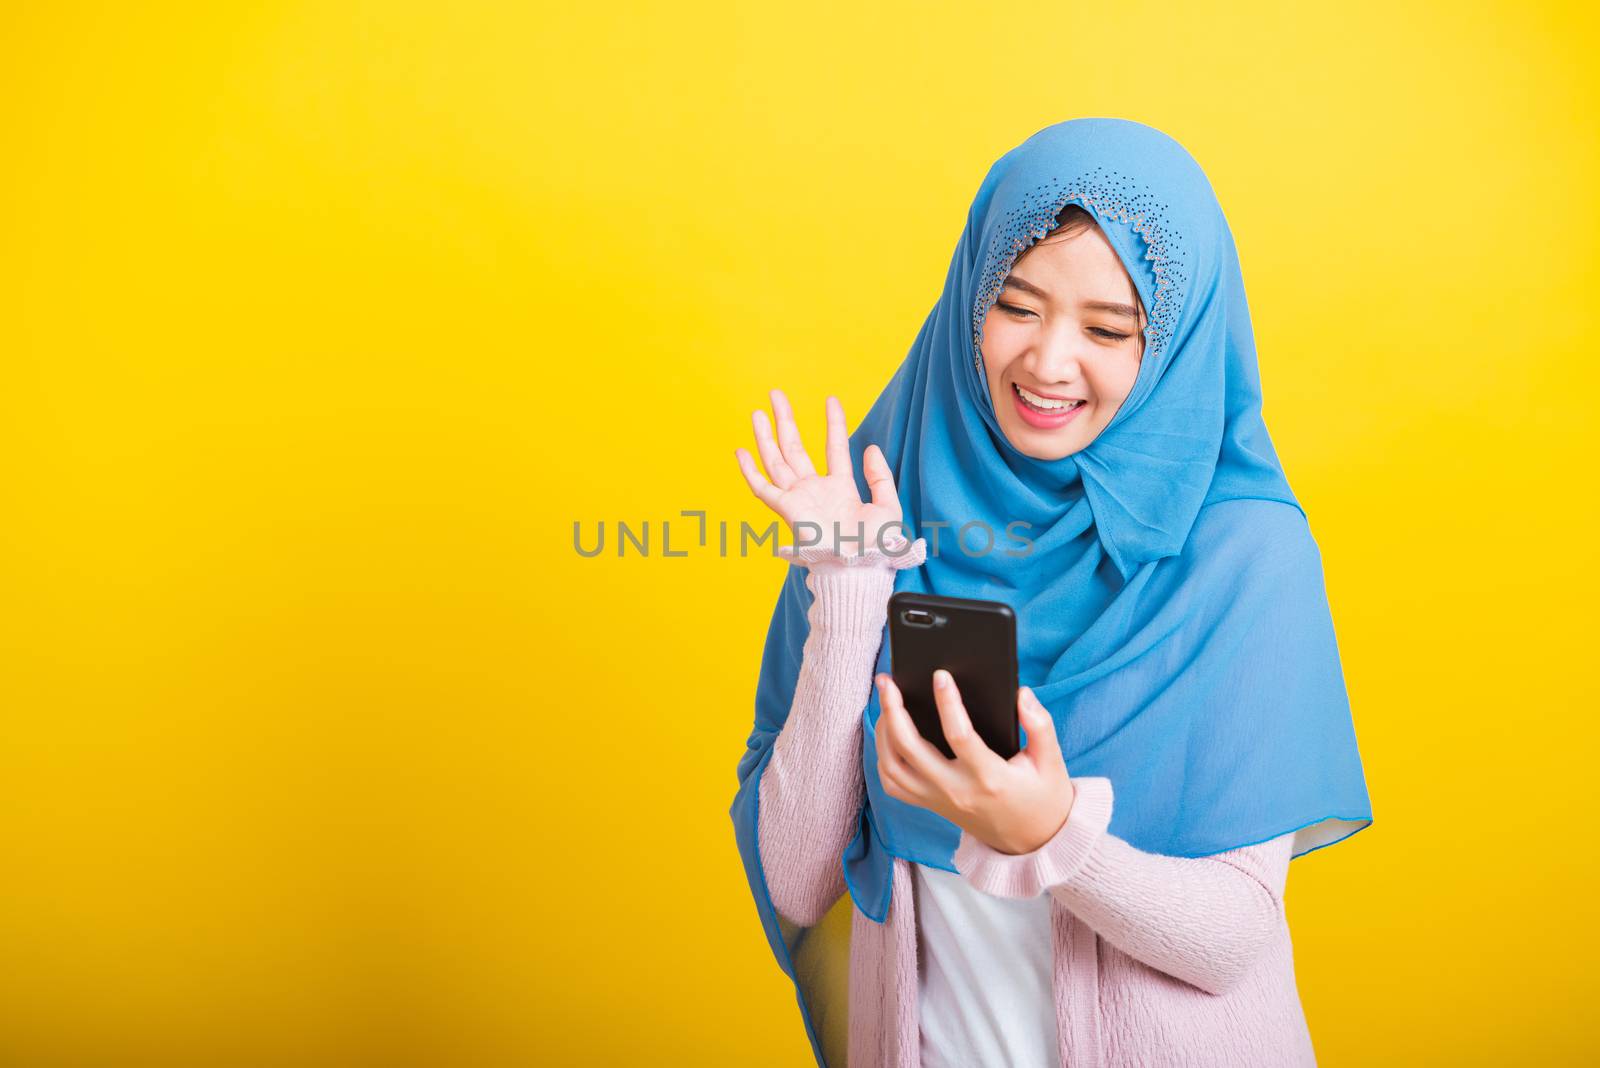 Asian Muslim Arab, Portrait of happy beautiful young woman Islam religious wear veil hijab funny smile she selfie or video call mobile smart phone raise hand say hello isolated on yellow background